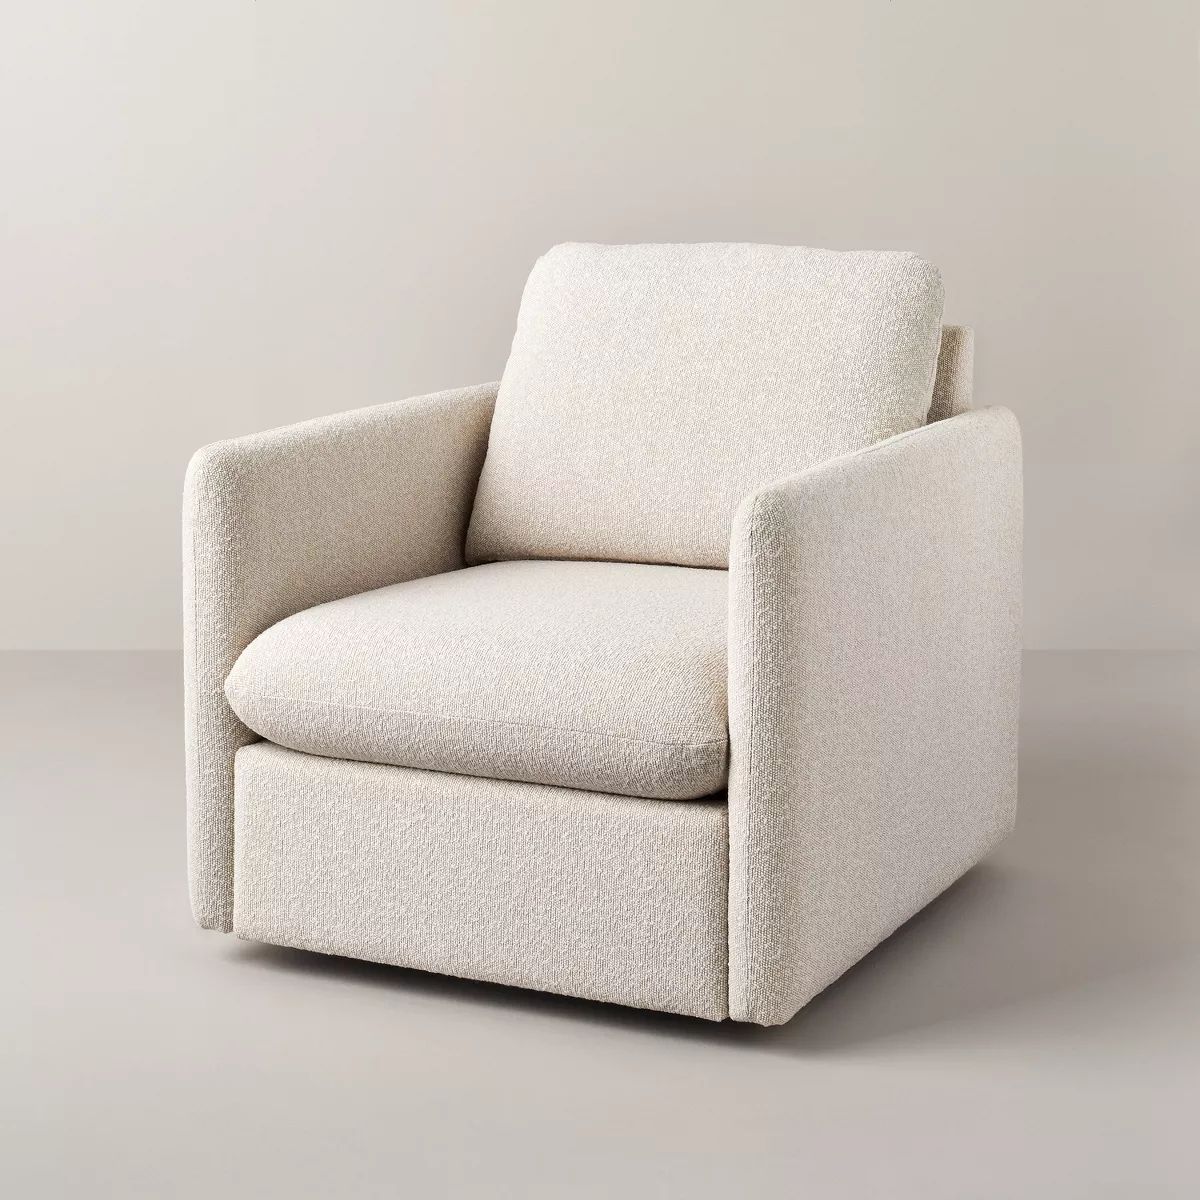 Boucle Upholstered Swivel Arm Chair - Hearth & Hand™ with Magnolia | Target